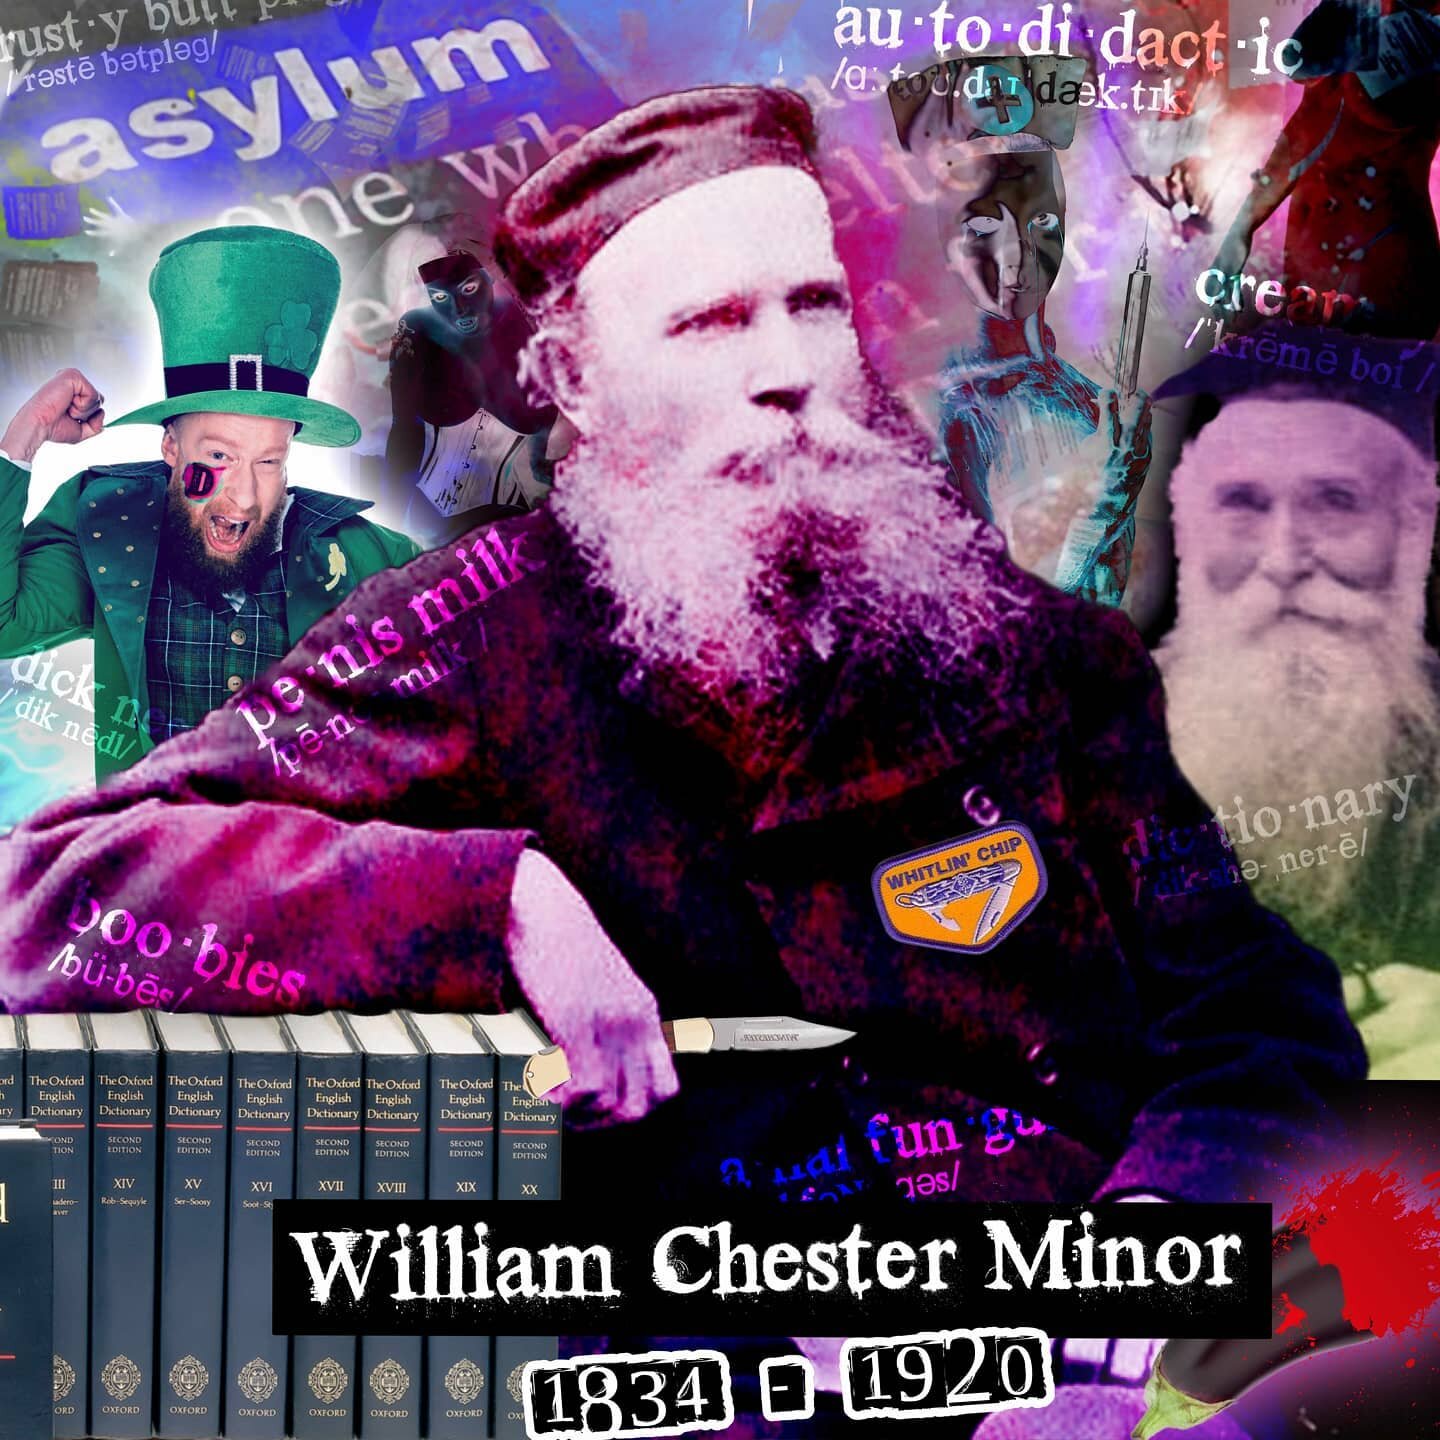 NEW EPISODE 

William Chester Minor was classically deranged monomaniac who was handy with words, handguns, and surgical instruments. He also majorly contributed to The Oxford English Dictionary, standardizing the proverbial urchin-molasses-fire that